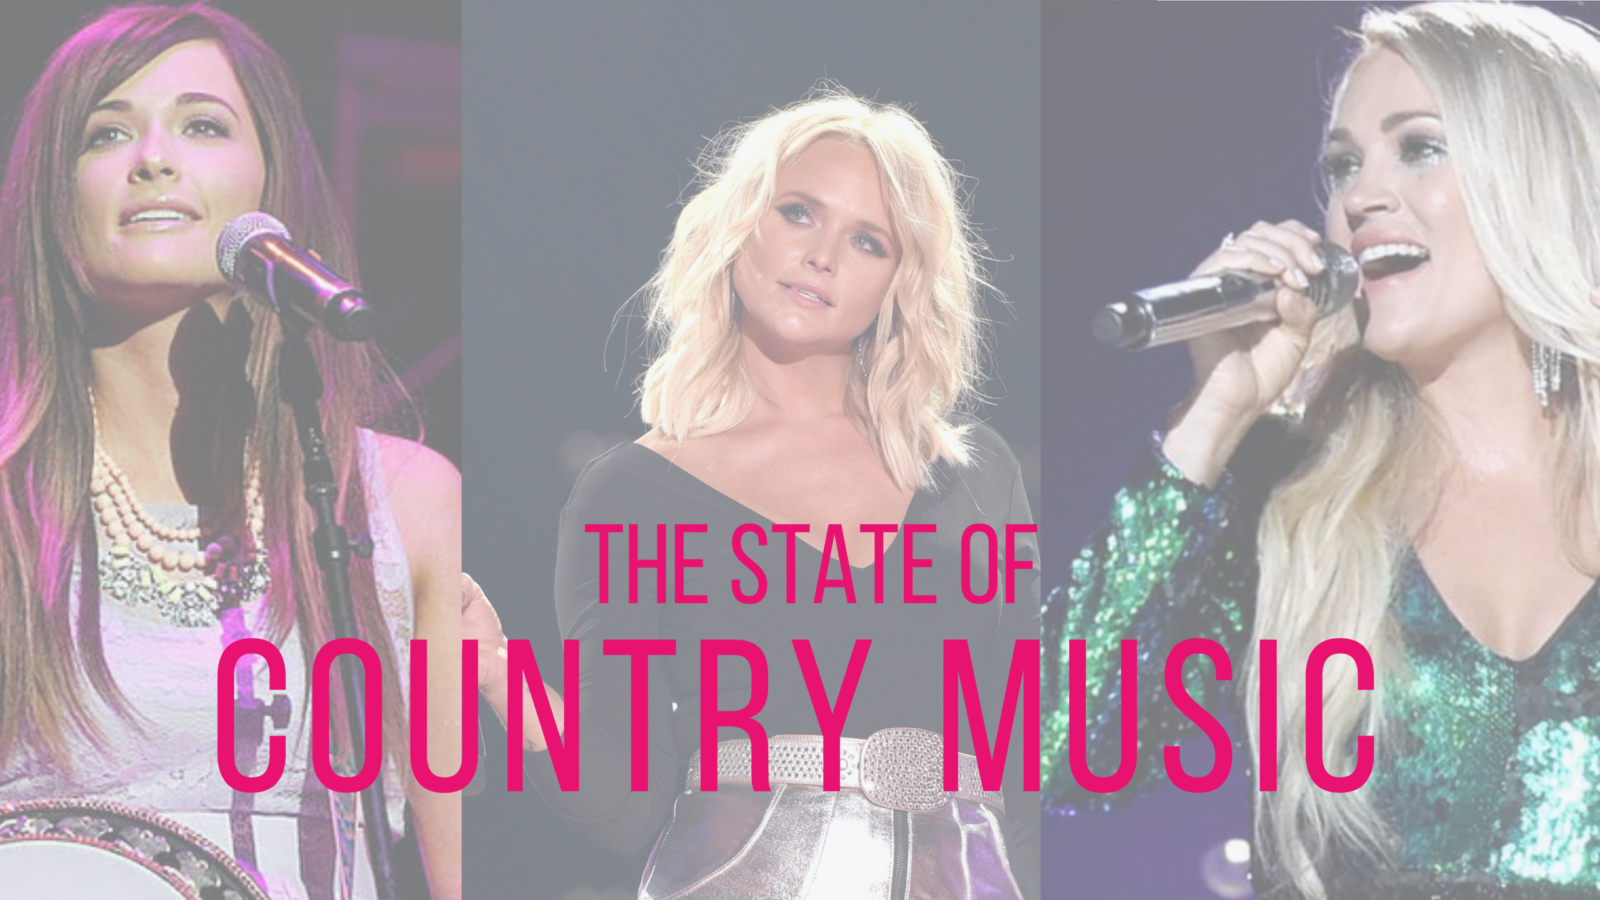 The State of Country Music